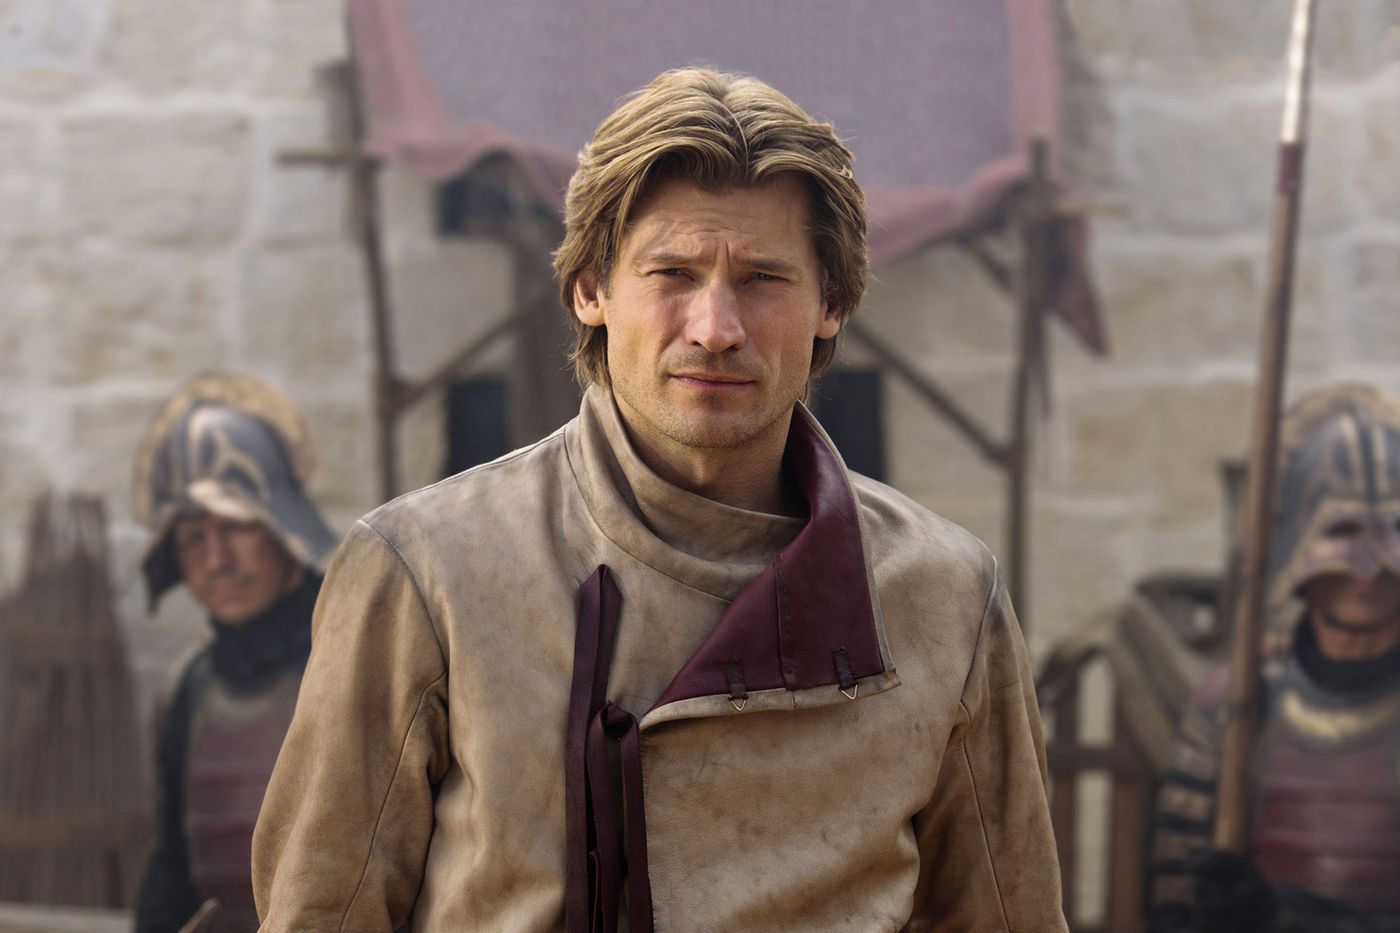 jaime lannister was hotter with a bowl cut